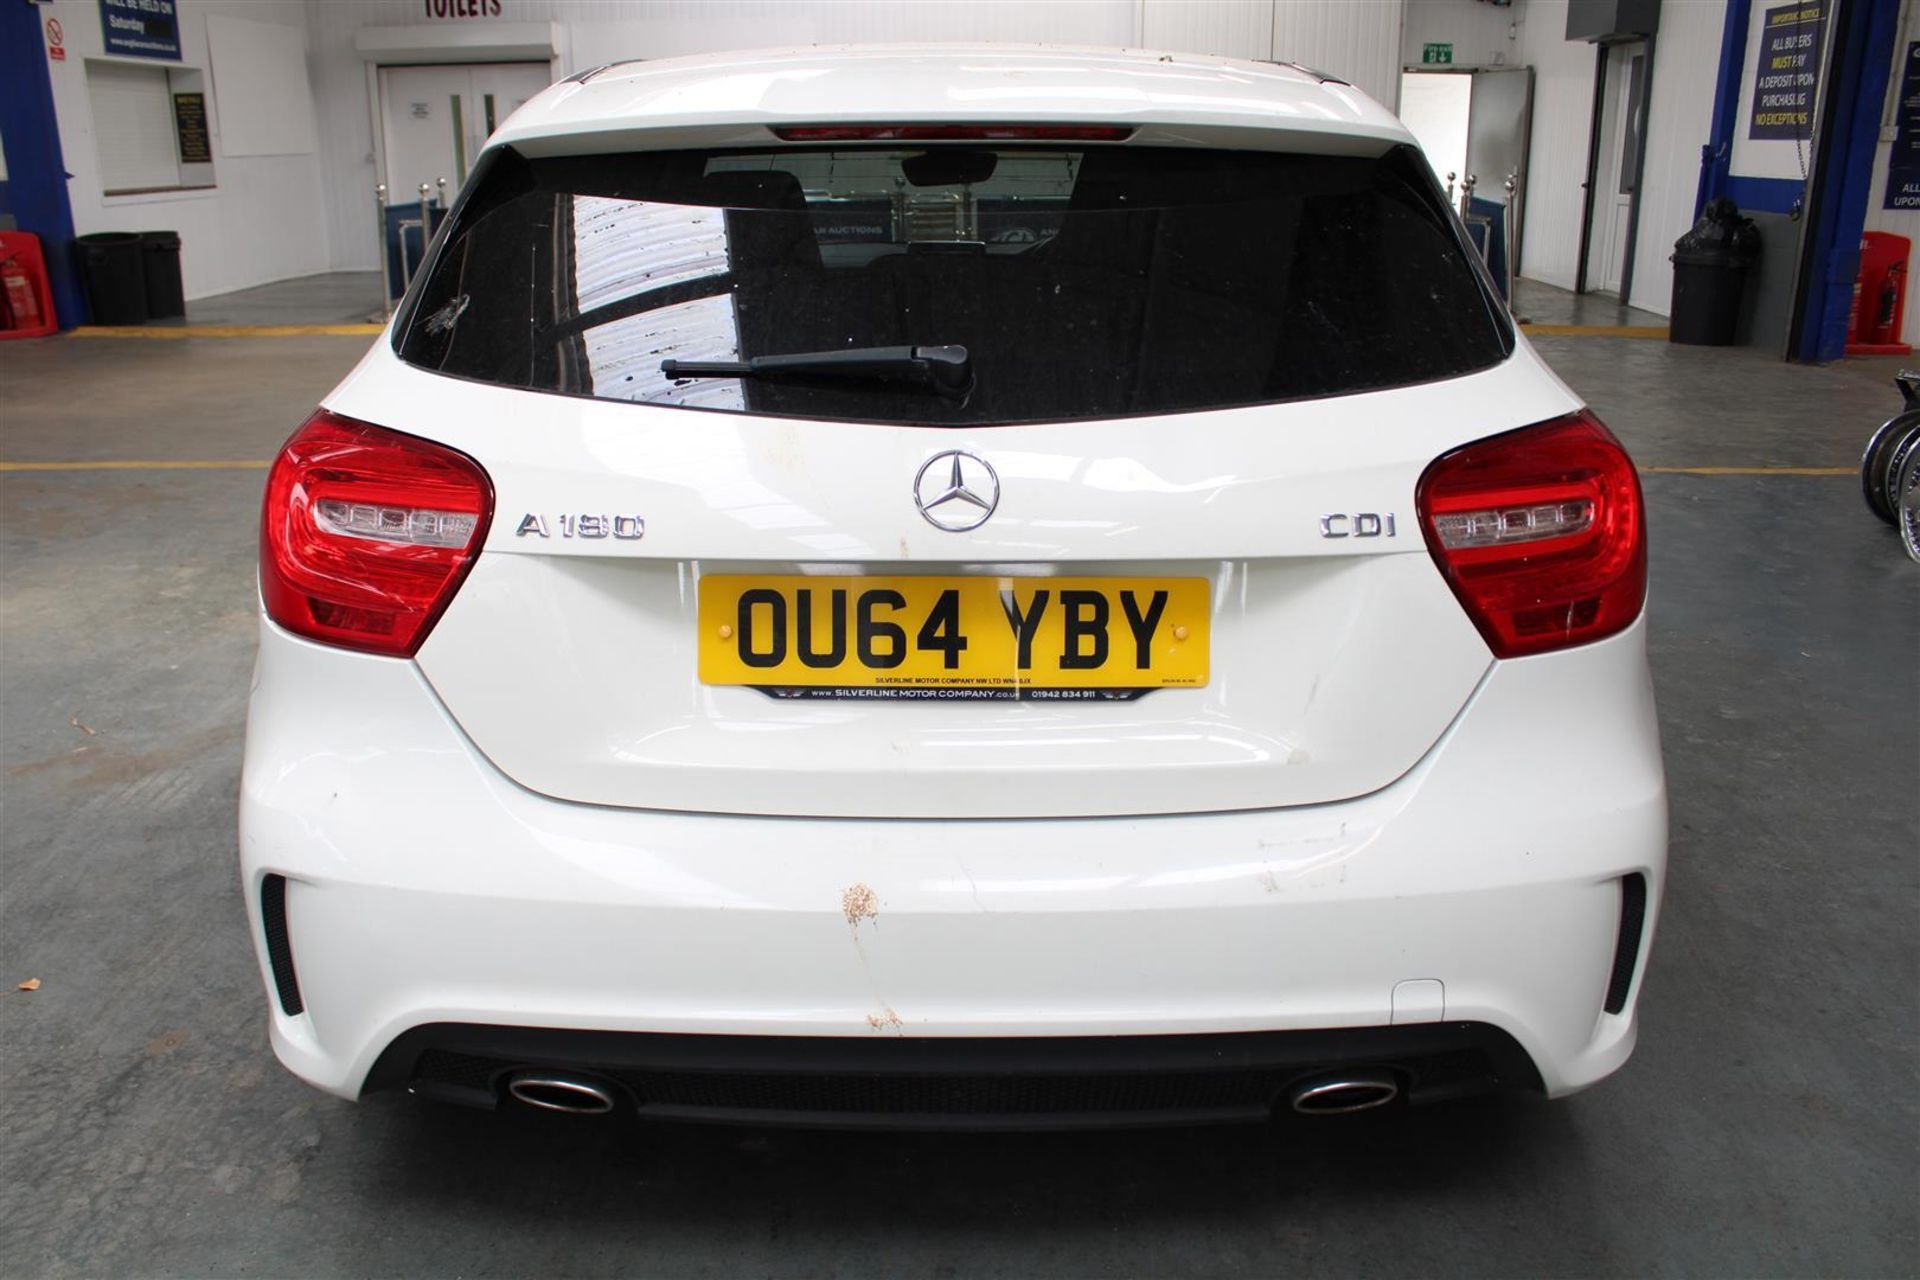 64 14 Mercedes A180 Blue AMG Sport - Image 31 of 36